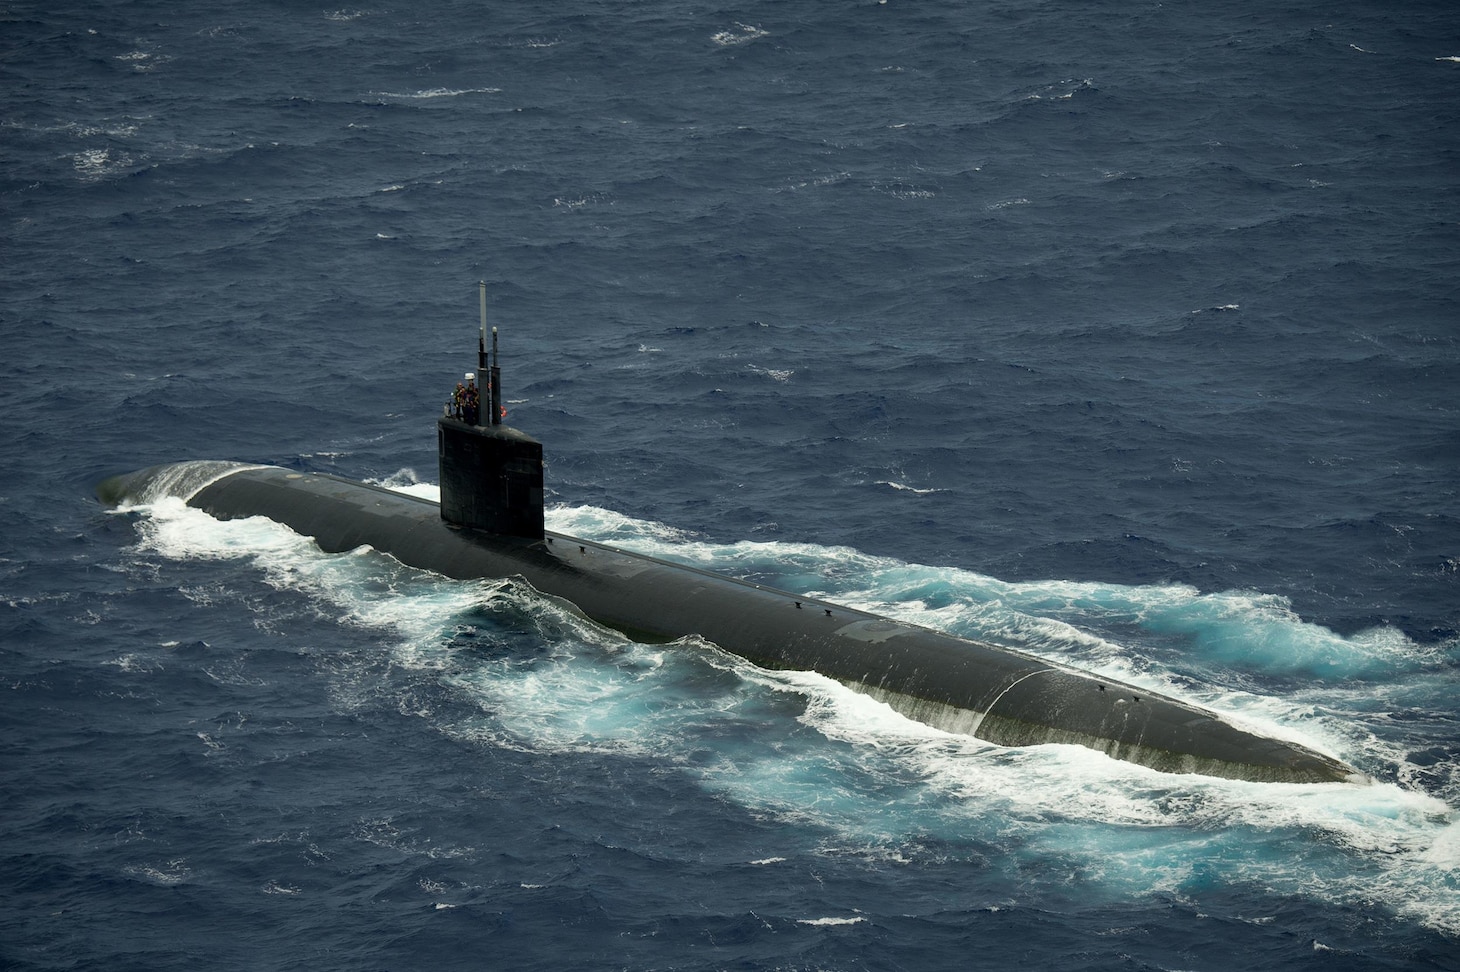 File photo from July 28, 2016:  Los Angeles-class fast-attack submarine USS Cheyenne (SSN 773) transits in close formation as one of 40 ships and submarines representing 13 international partner nations during Rim of the Pacific 2016. Twenty-six nations, more than 40 ships and submarines, more than 200 aircraft, and 25,000 personnel are participating in RIMPAC from June 30 to Aug. 4, in and around the Hawaiian Islands and Southern California. The world's largest international maritime exercise, RIMPAC provides a unique training opportunity that helps participants foster and sustain the cooperative relationships that are critical to ensuring the safety of sea lanes and security on the world's oceans. RIMPAC 2016 is the 25th exercise in the series that began in 1971. 